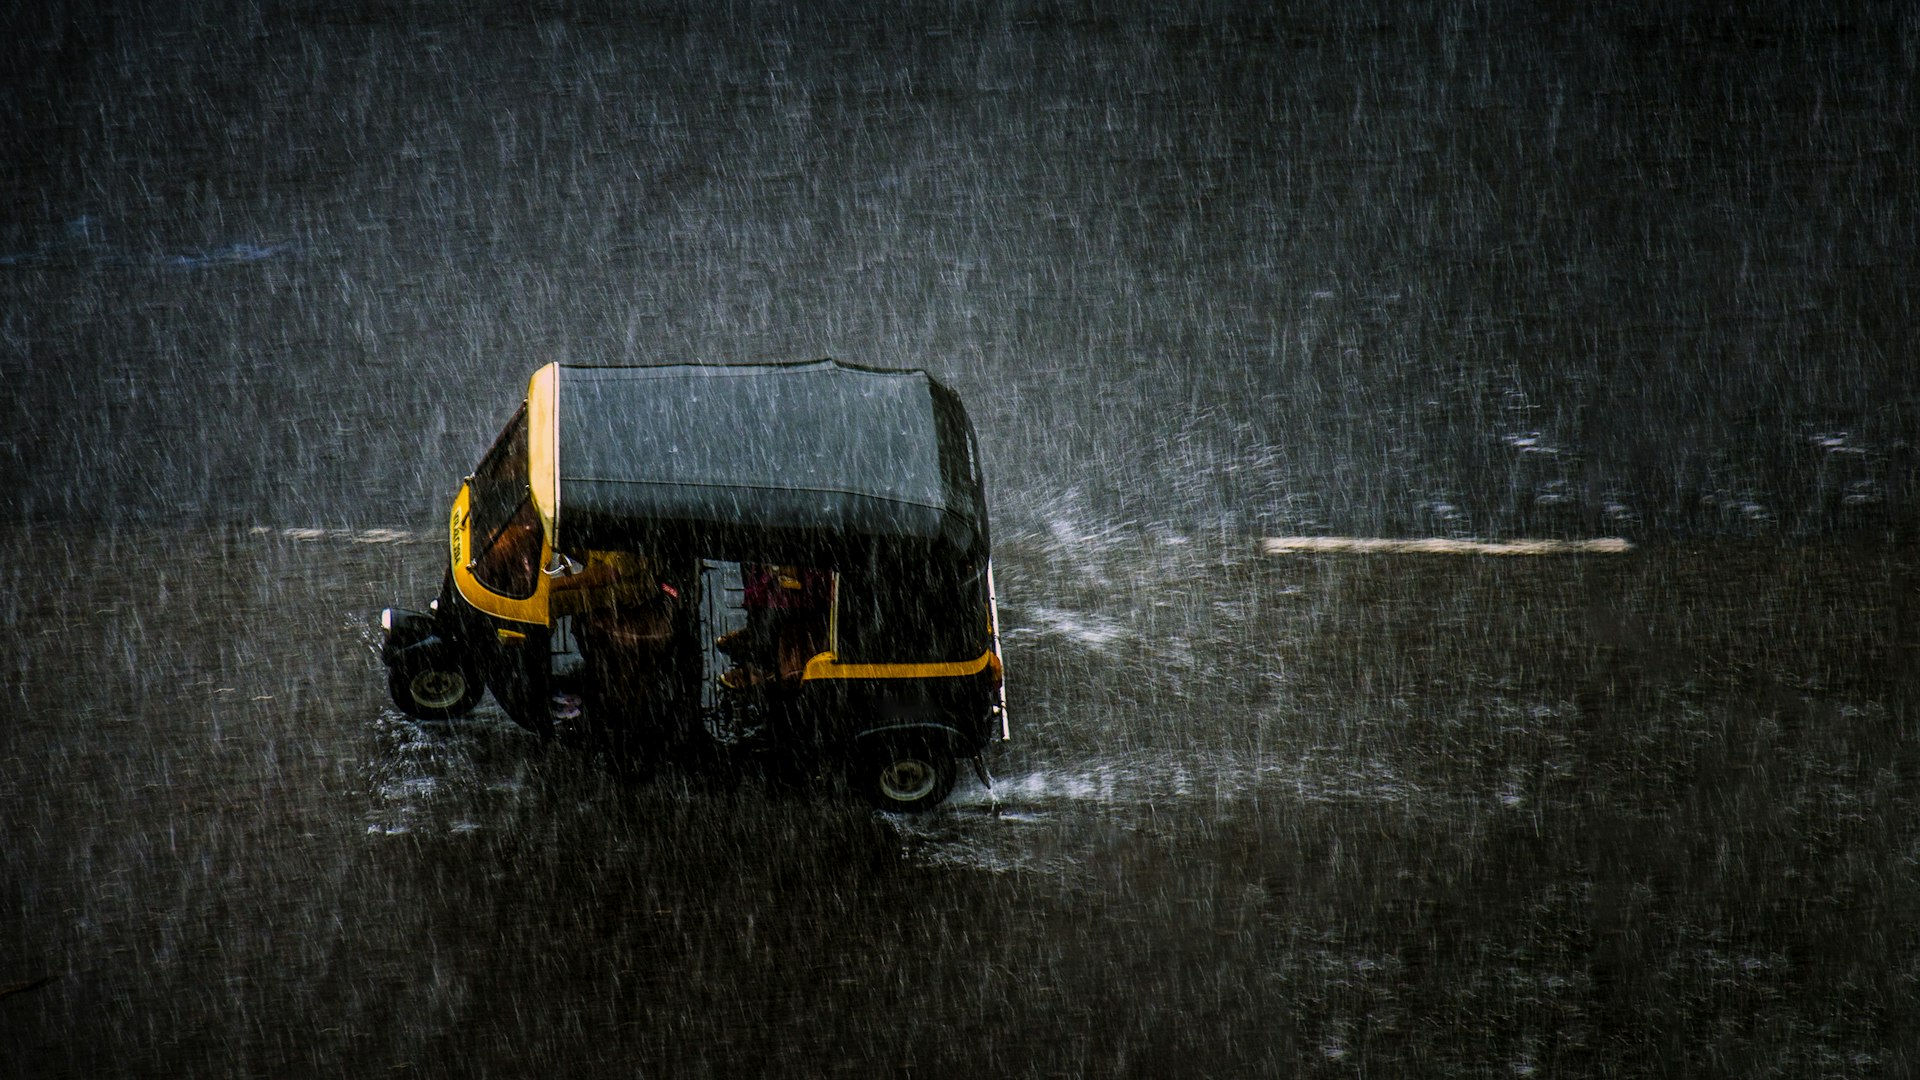 An auto rickshaw shot from above on the road during a heavy rainfall